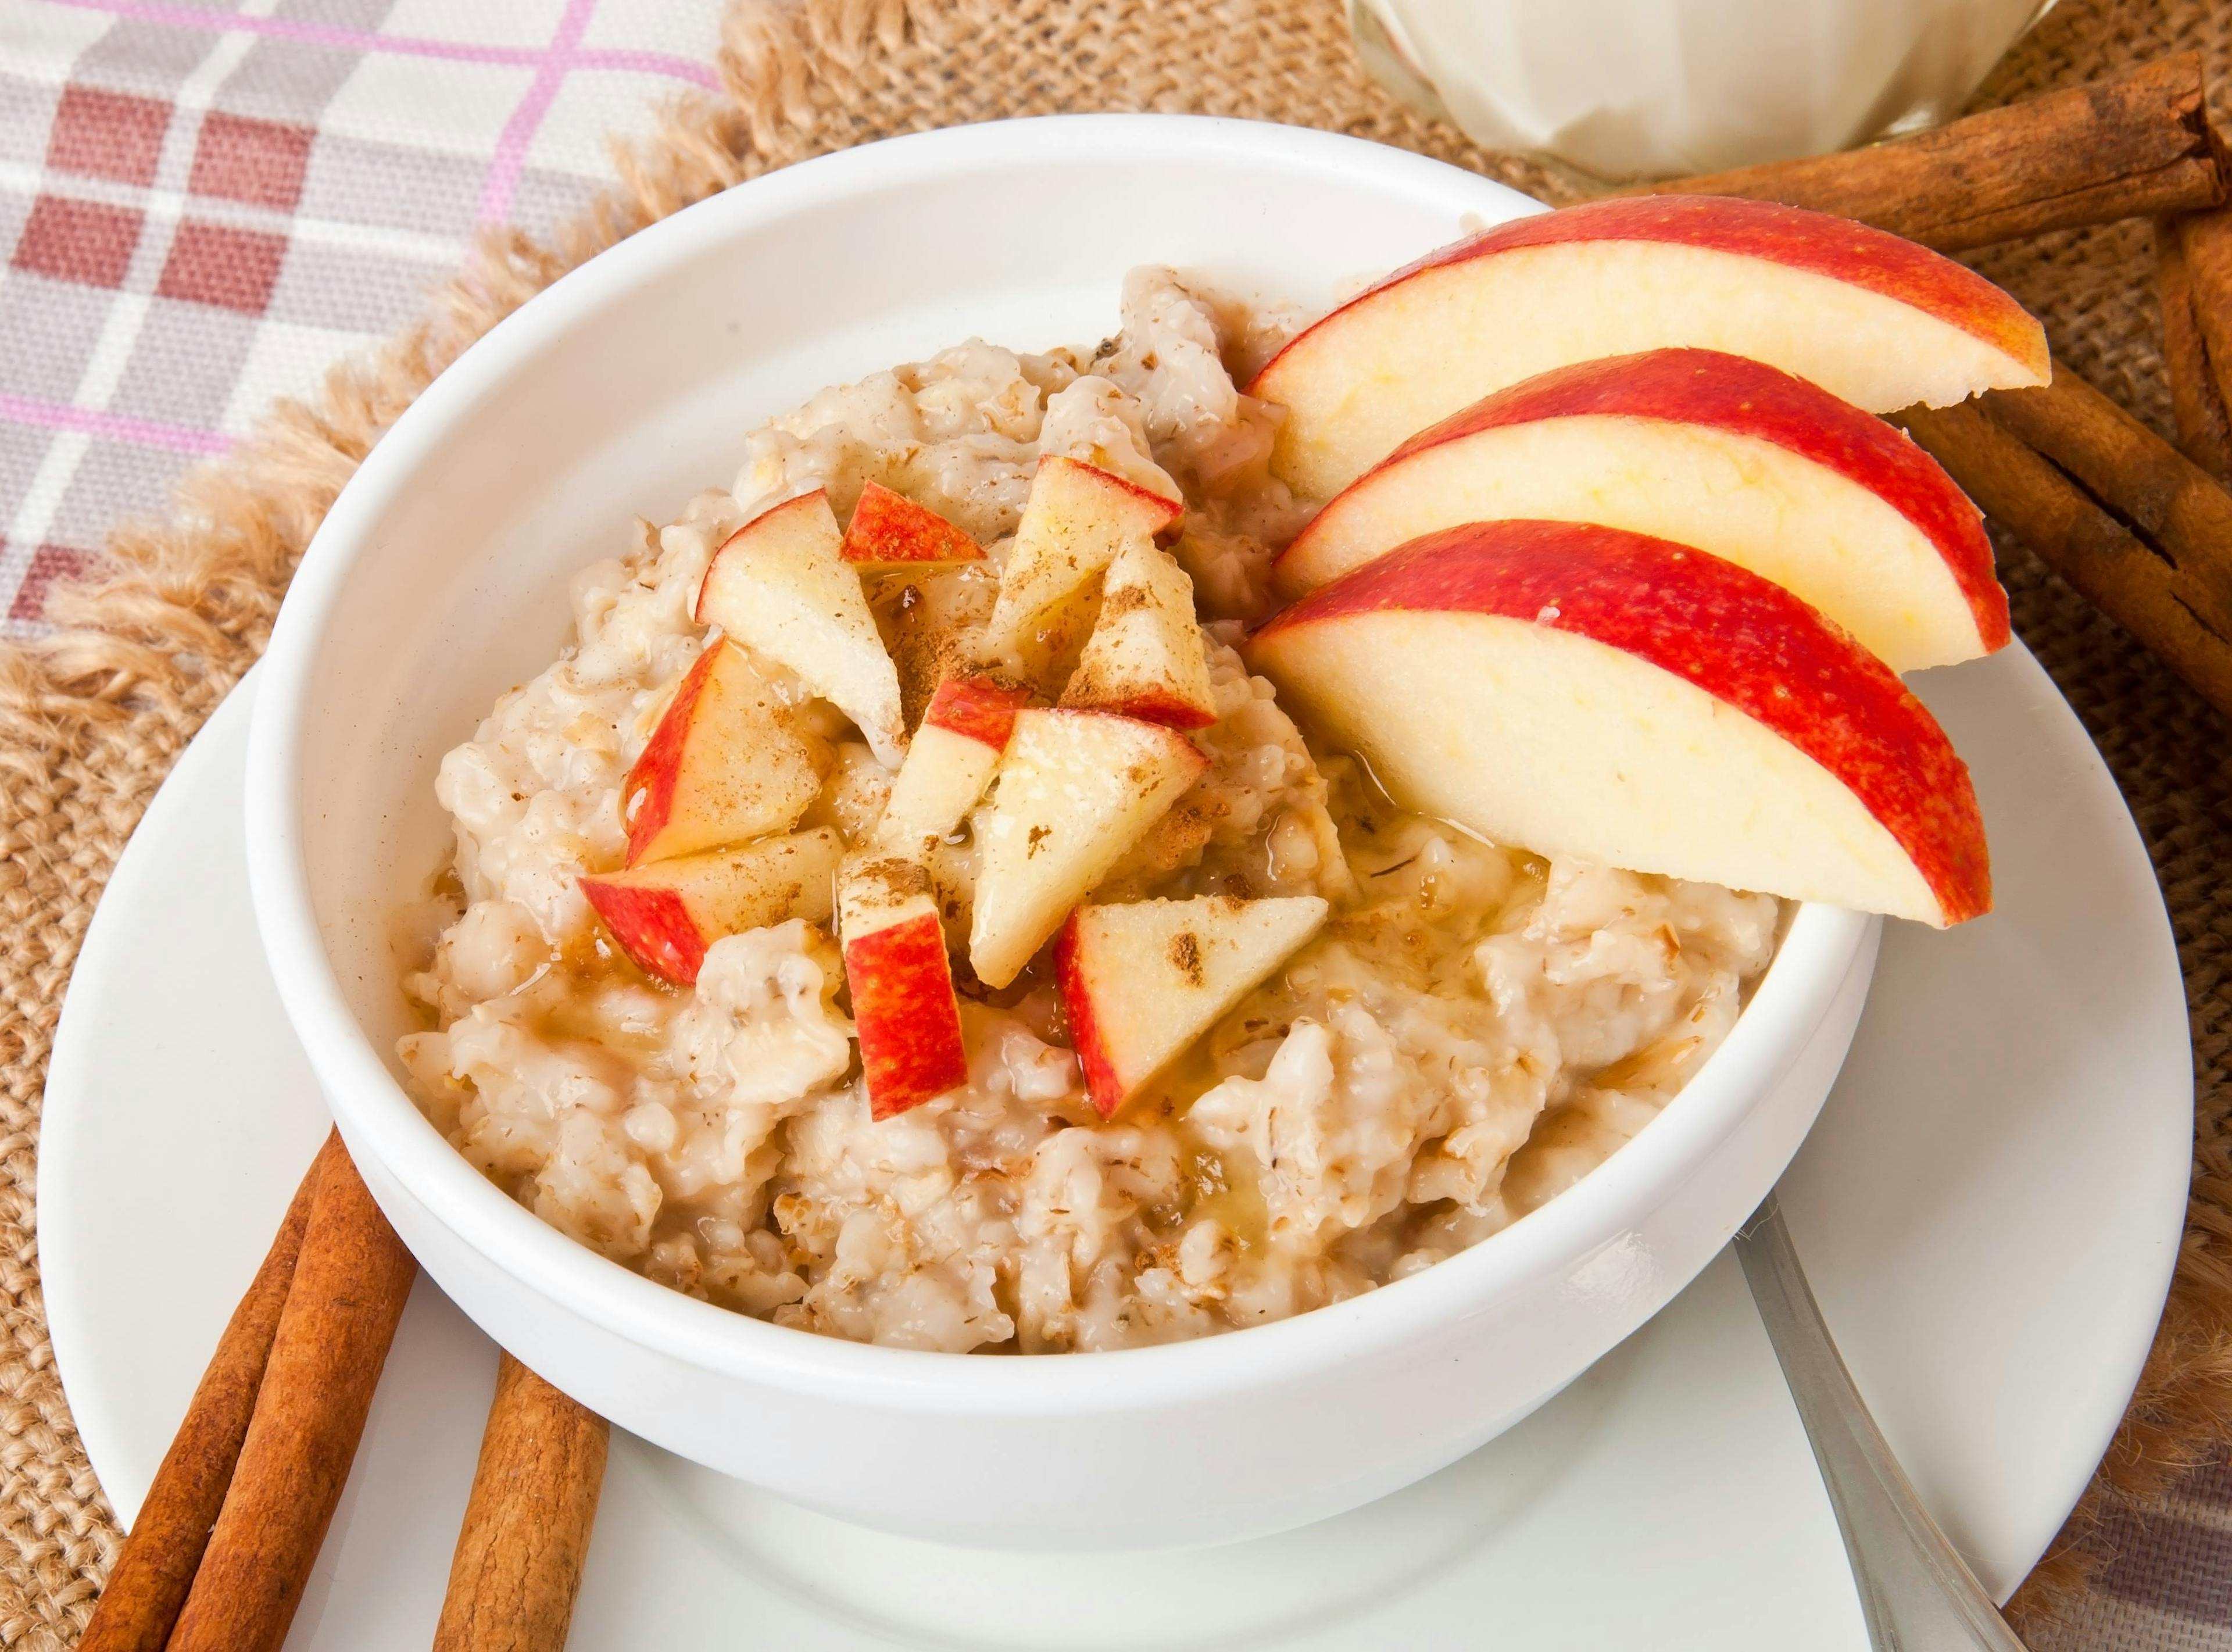  little protein from your milk and oatmeal and apples